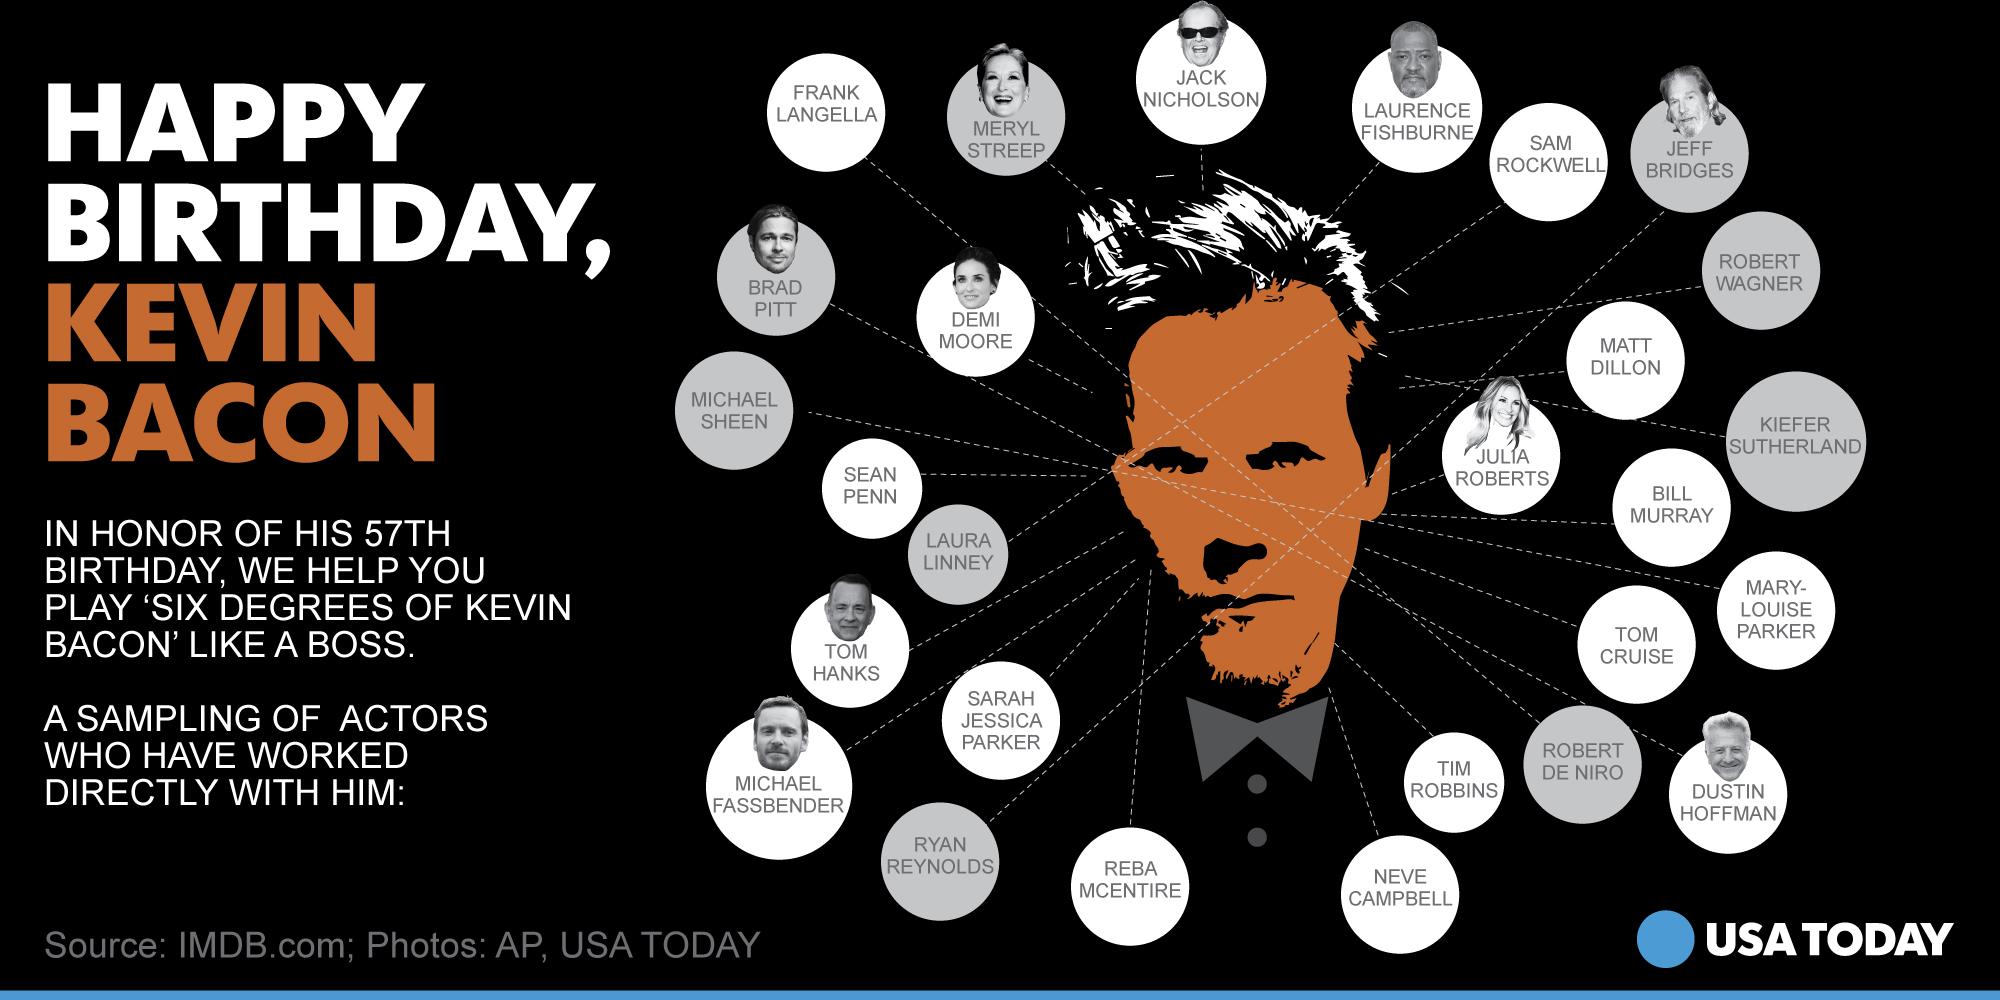 Happy birthday, Kevin Bacon! Let\s play a little game to celebrate. 